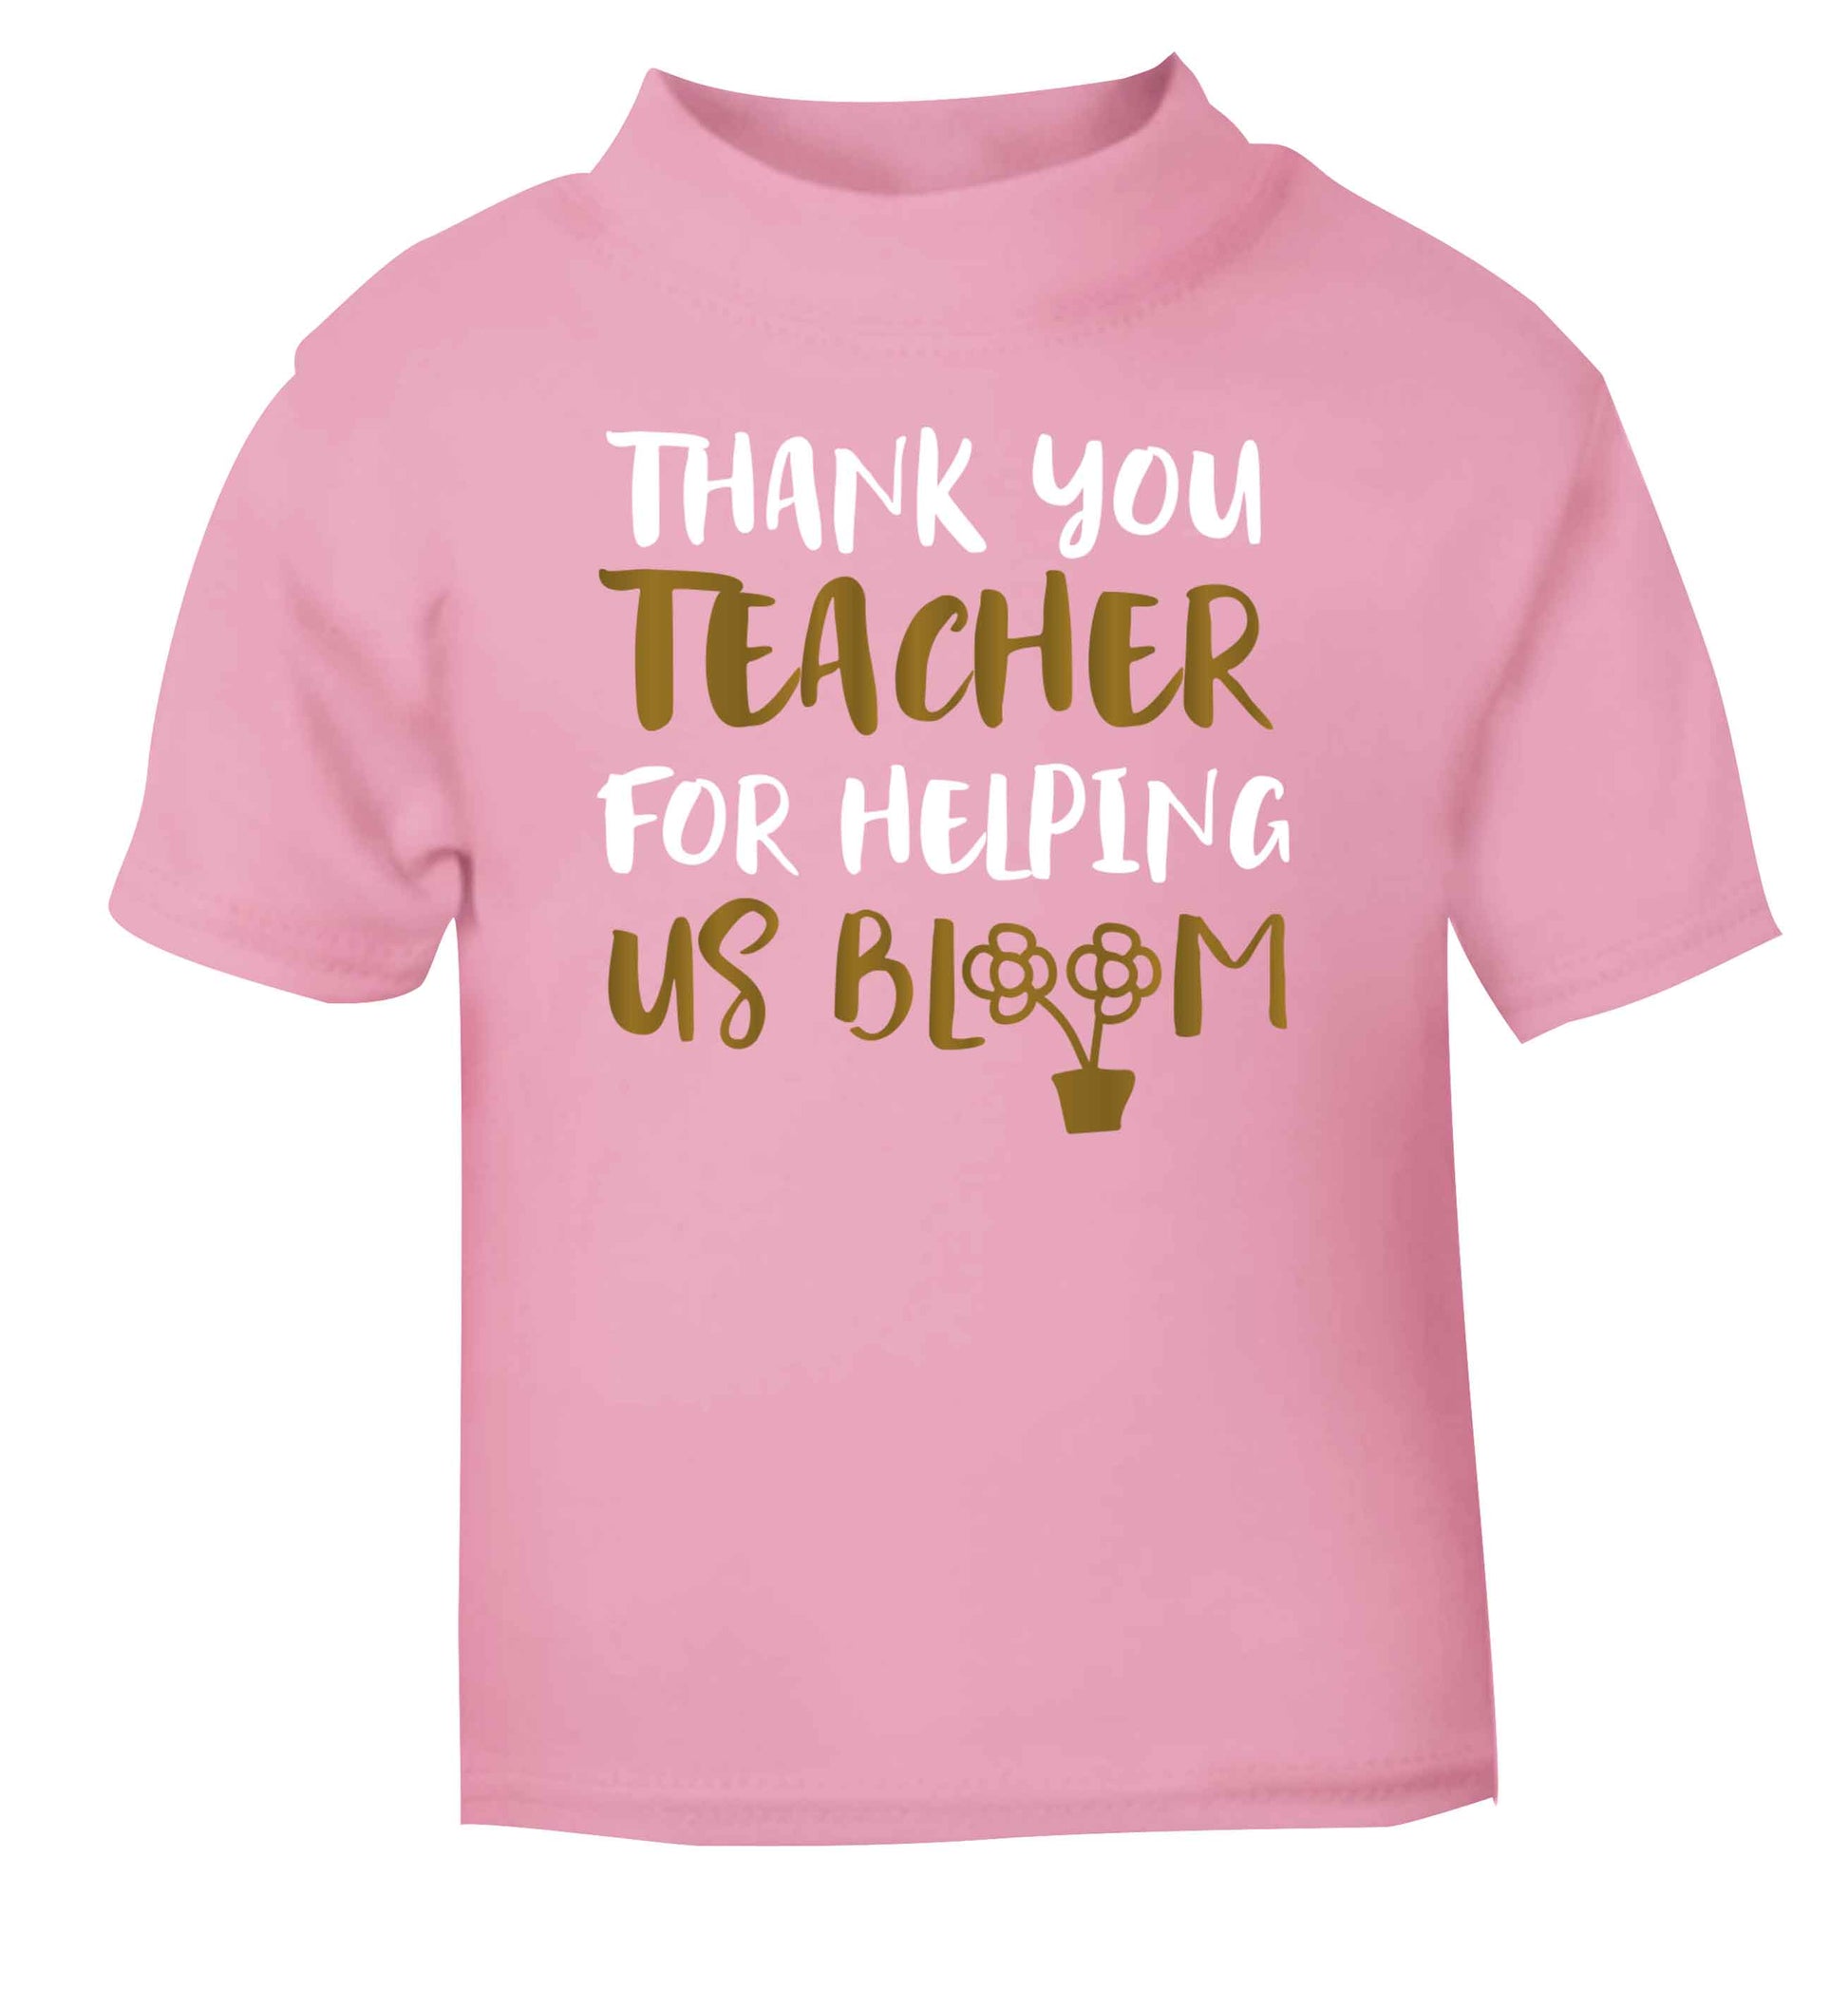 Thank you teacher for helping us bloom light pink Baby Toddler Tshirt 2 Years